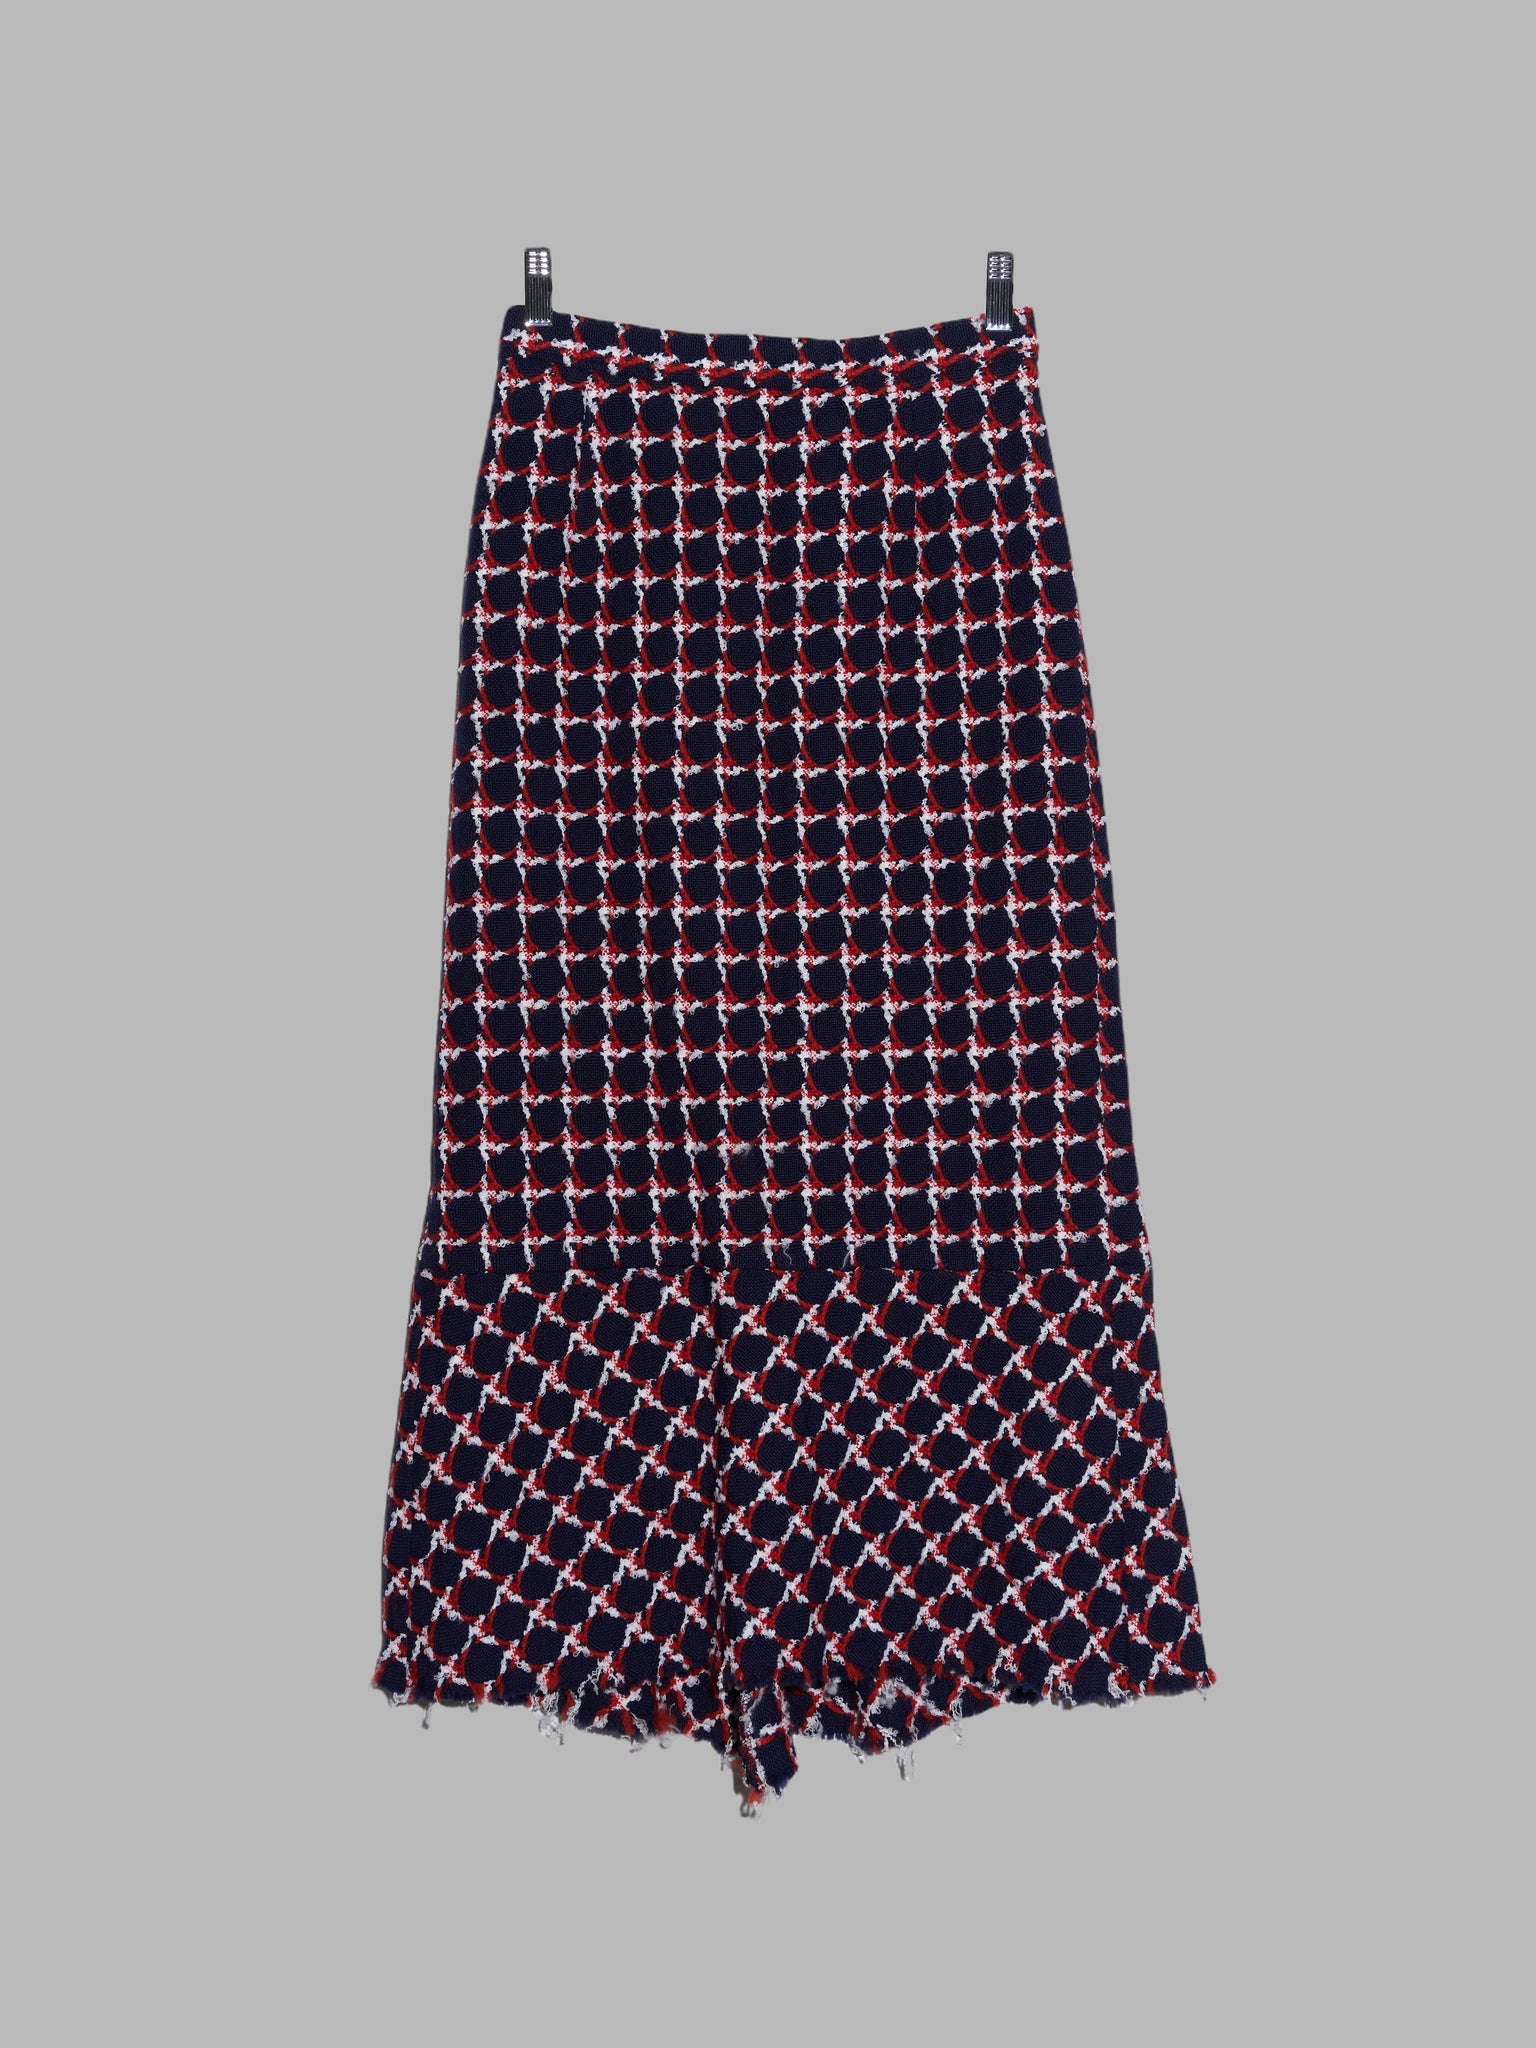 Junya Watanabe Comme des Garcons AW2001 navy wool circle pattern fitted skirt S